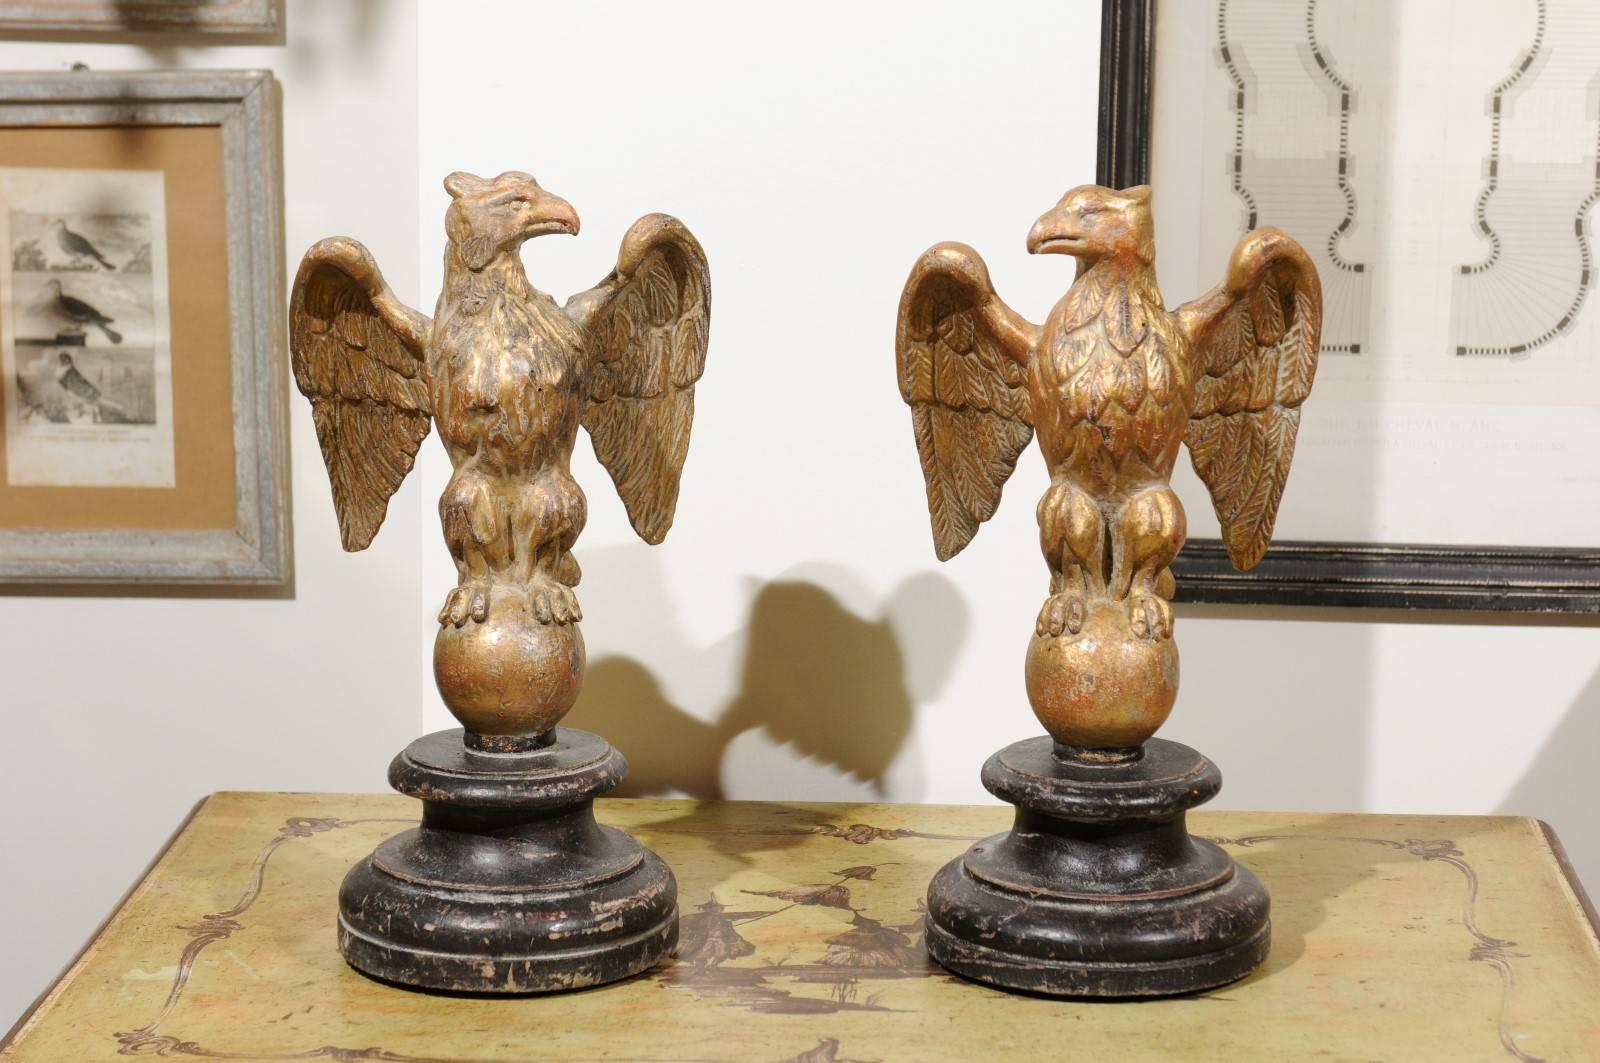 A pair of Italian 19th century carved giltwood eagles sculptures on black circular plinths. Each of this pair of exquisite bird statues on stands features an eagle with its wings extended, standing proudly on a sphere. The noble attitude shows the